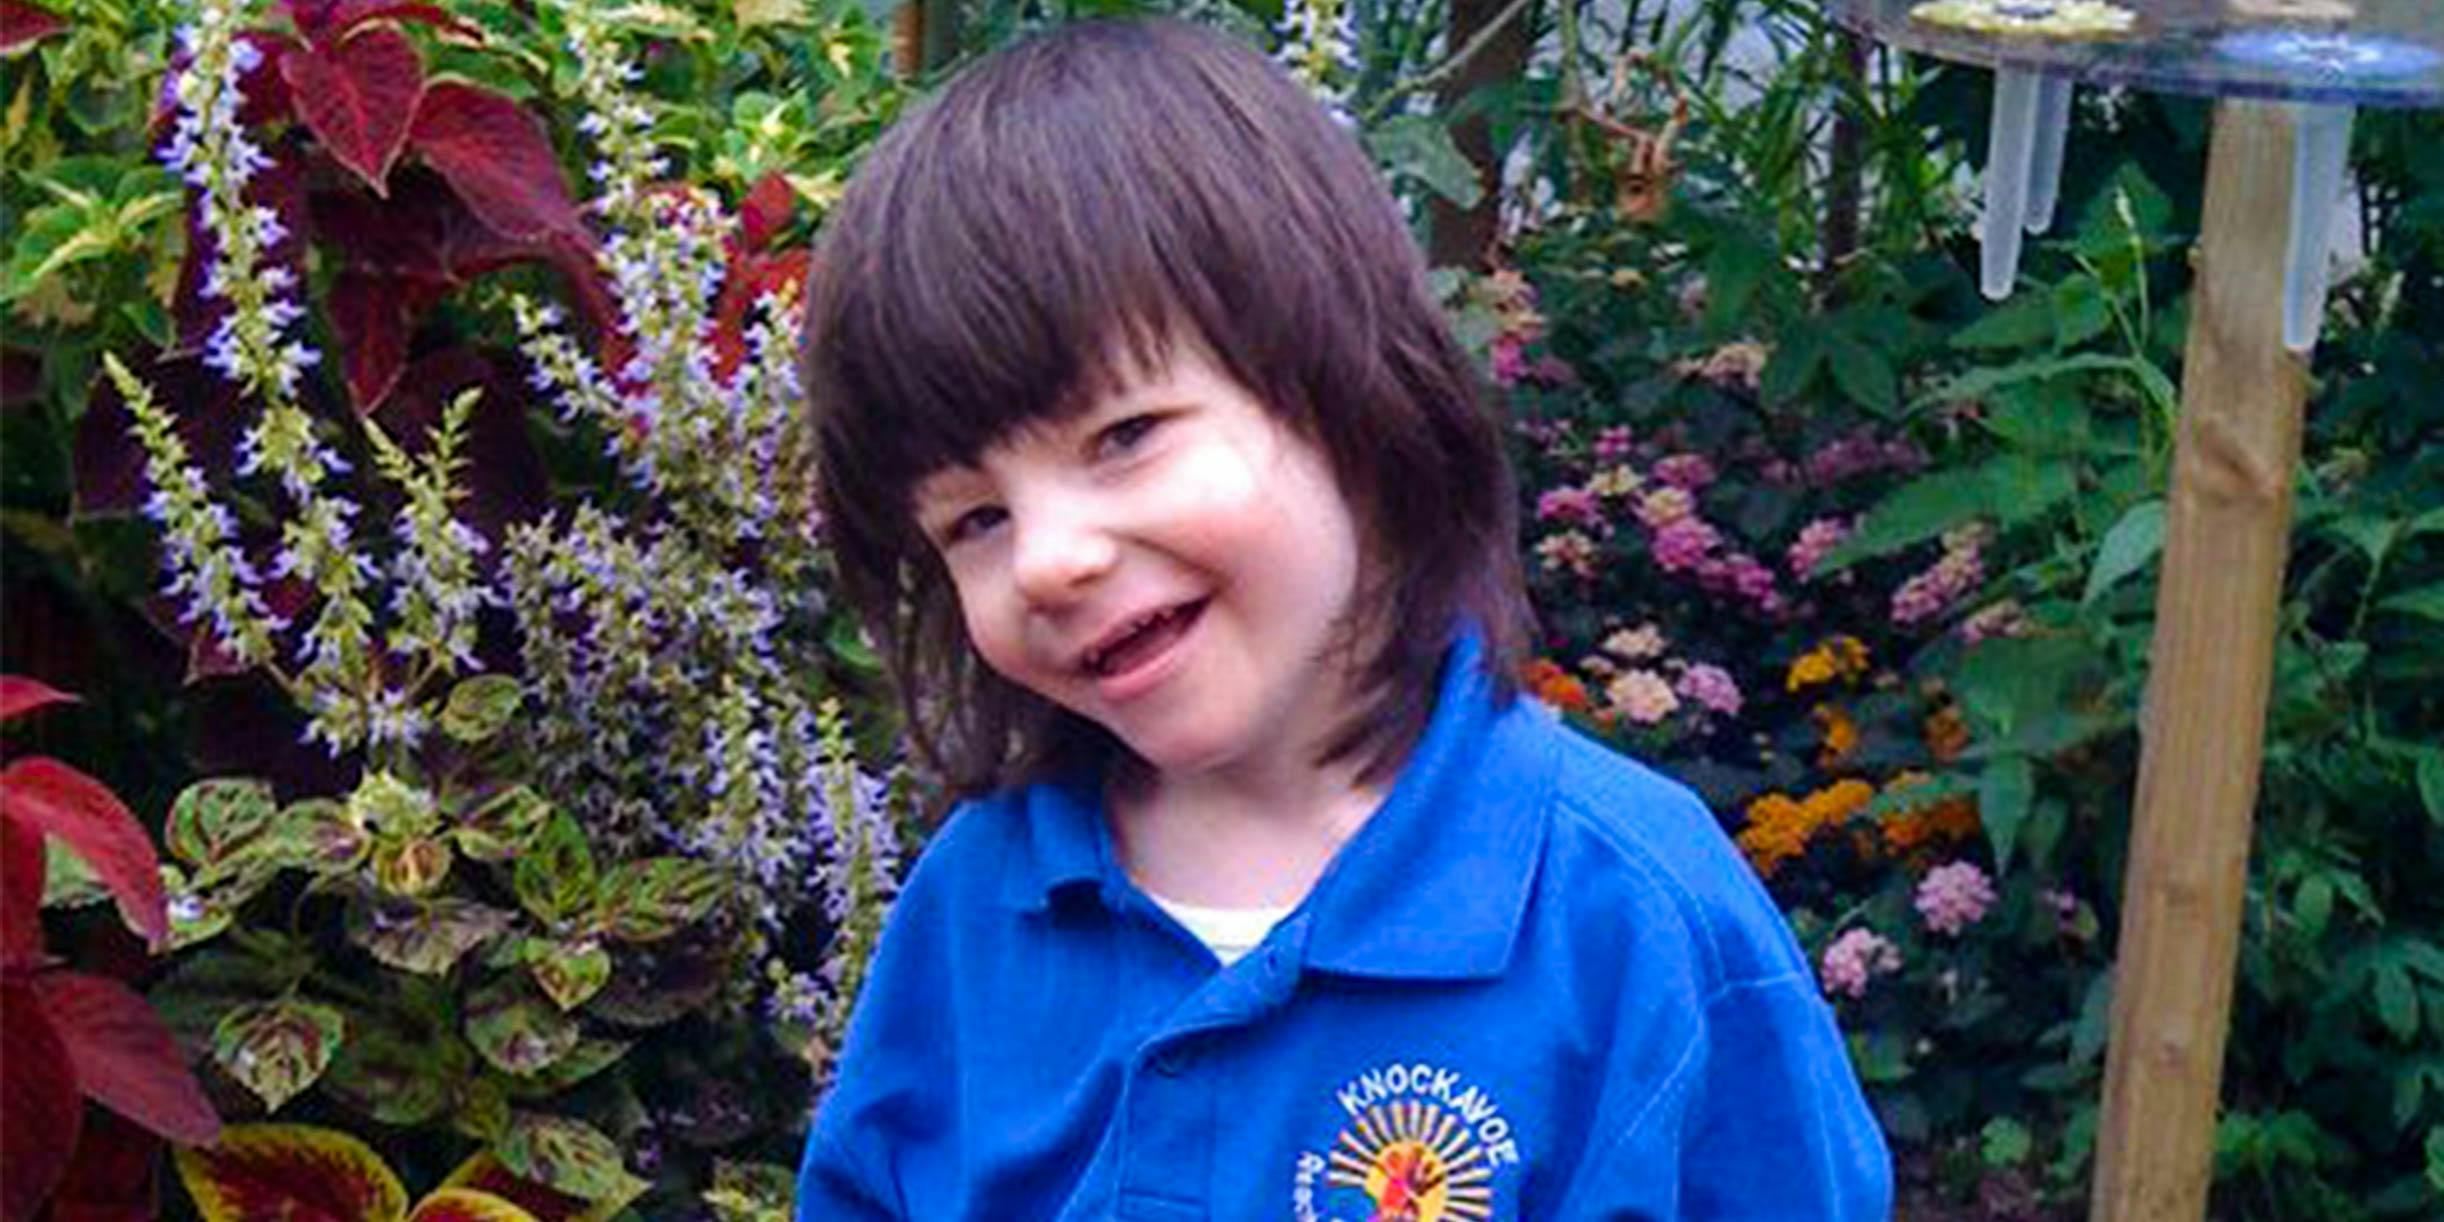 The UK Changes Its Mind About Allowing Epilepsy Patient Billy Caldwell Access To CBD